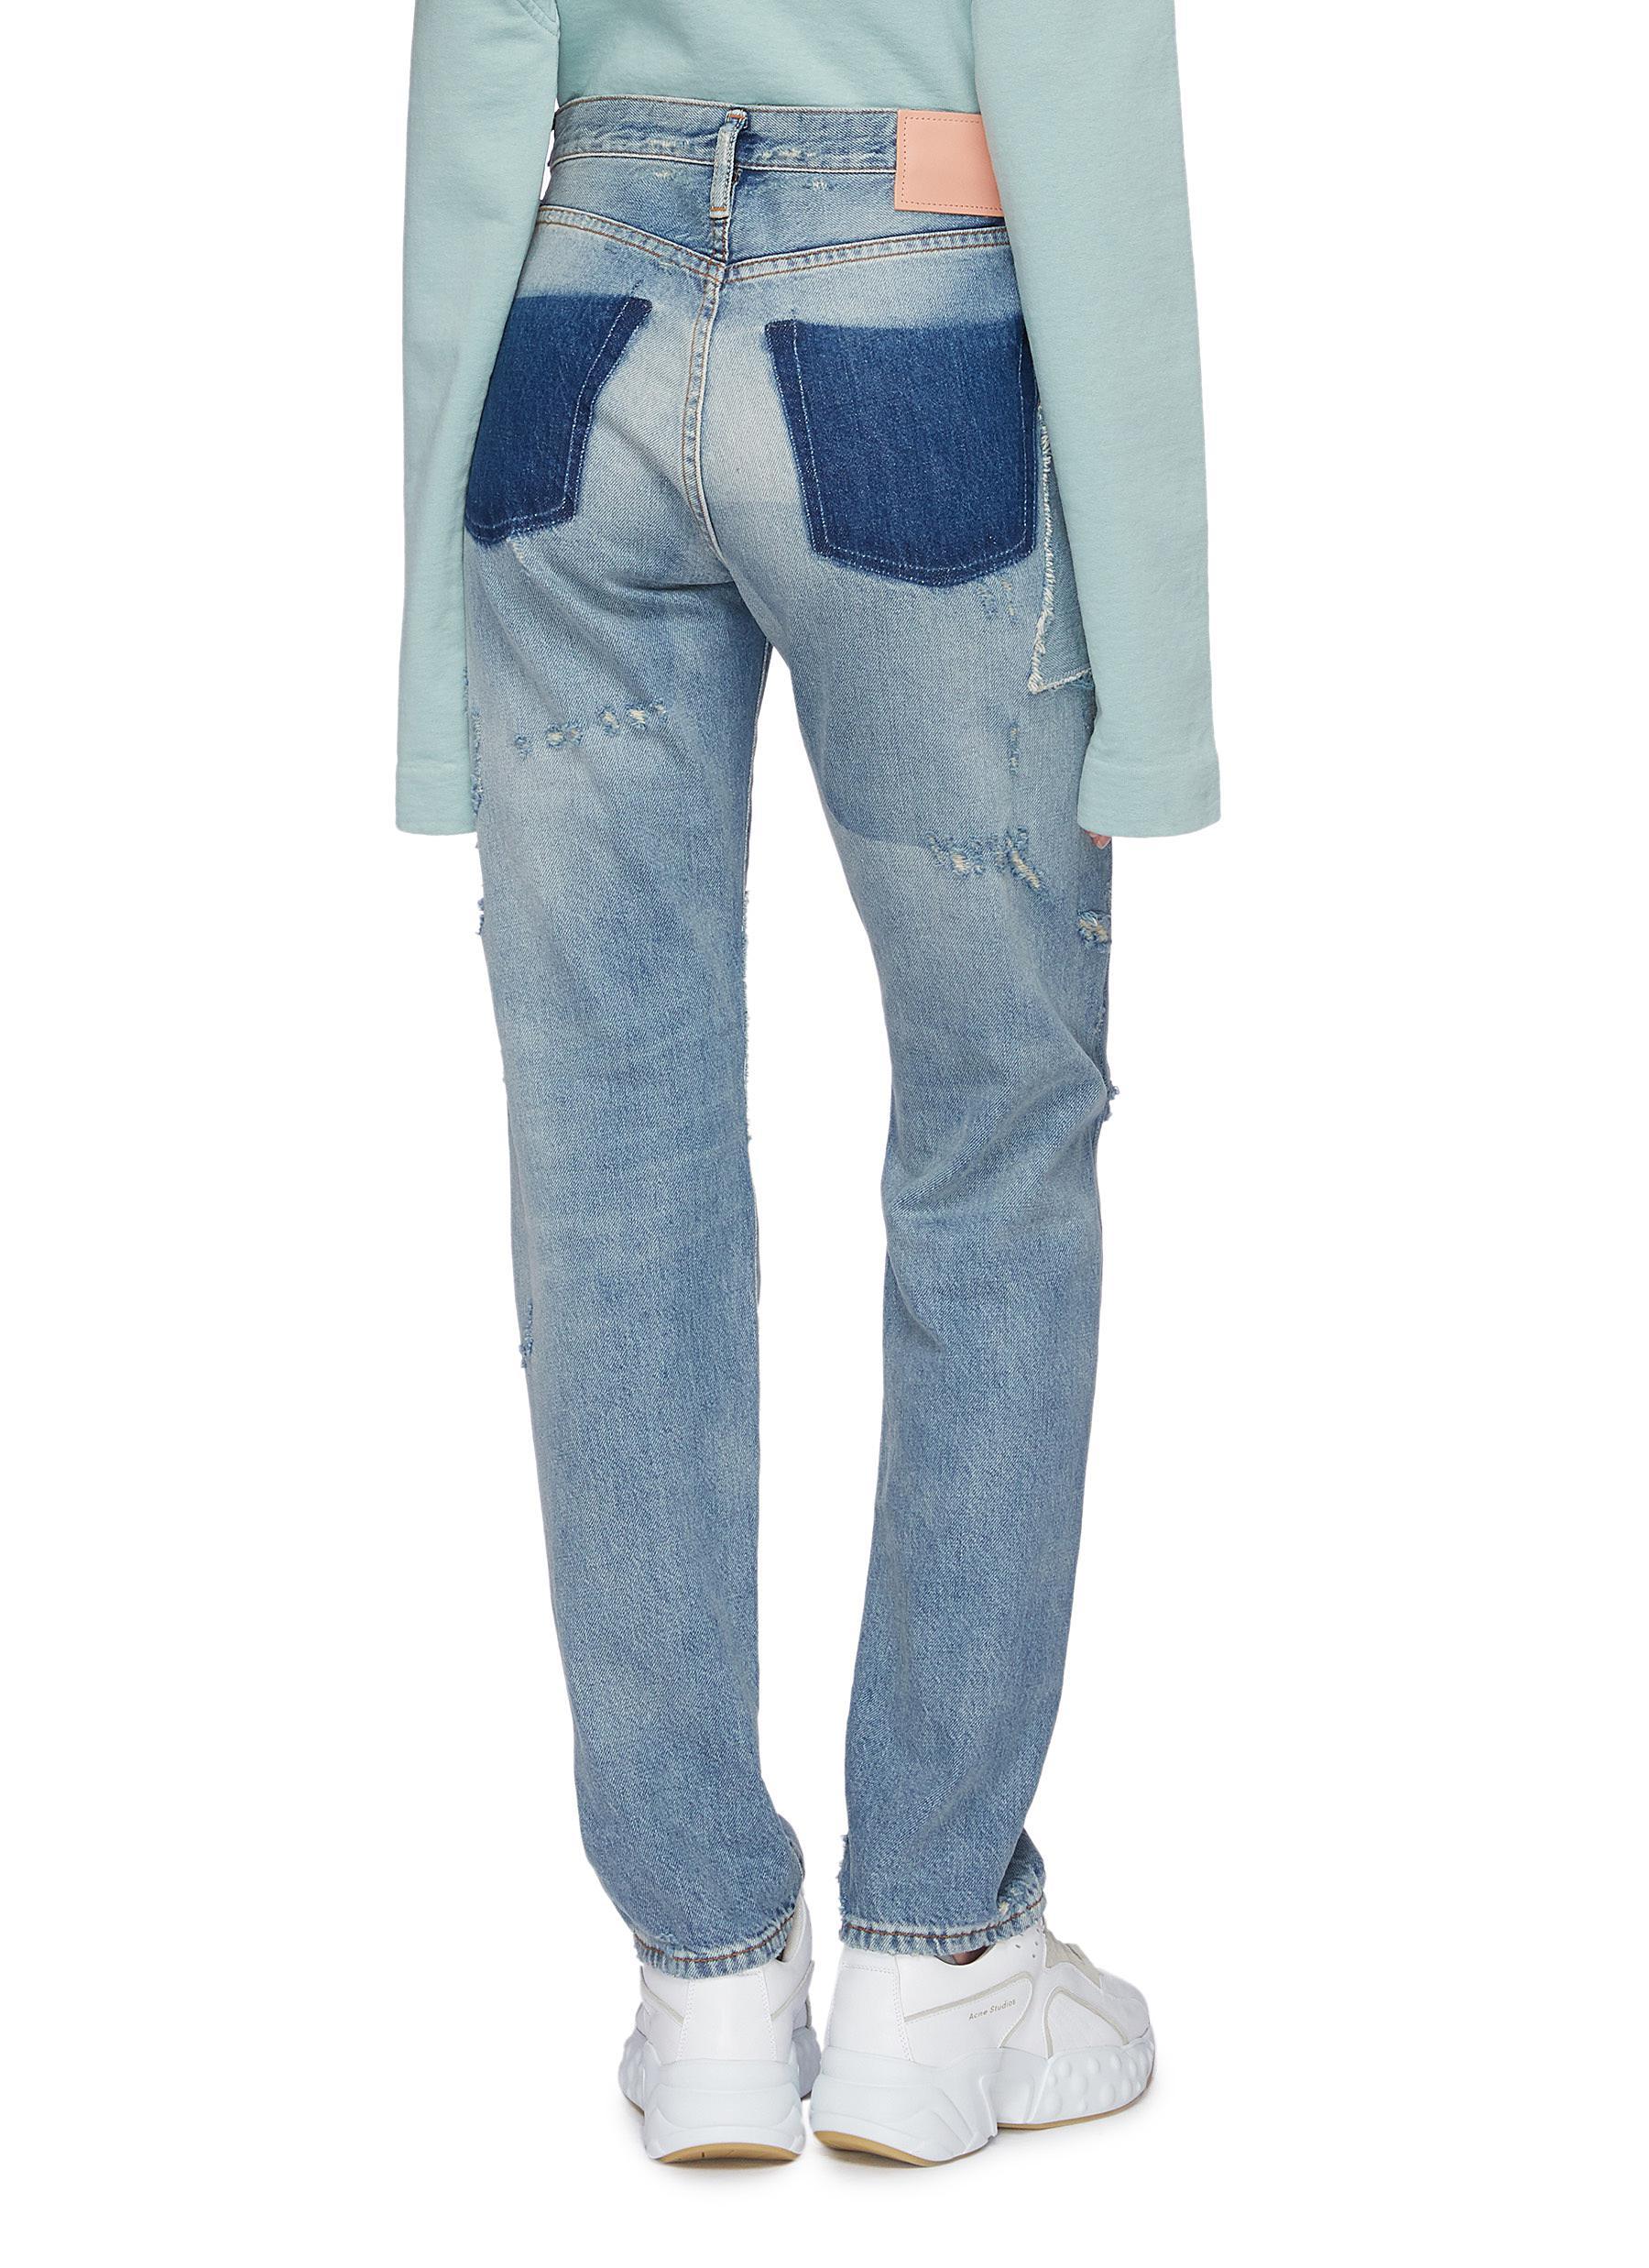 Acne Studios Patchwork Distressed Jeans in Blue | Lyst